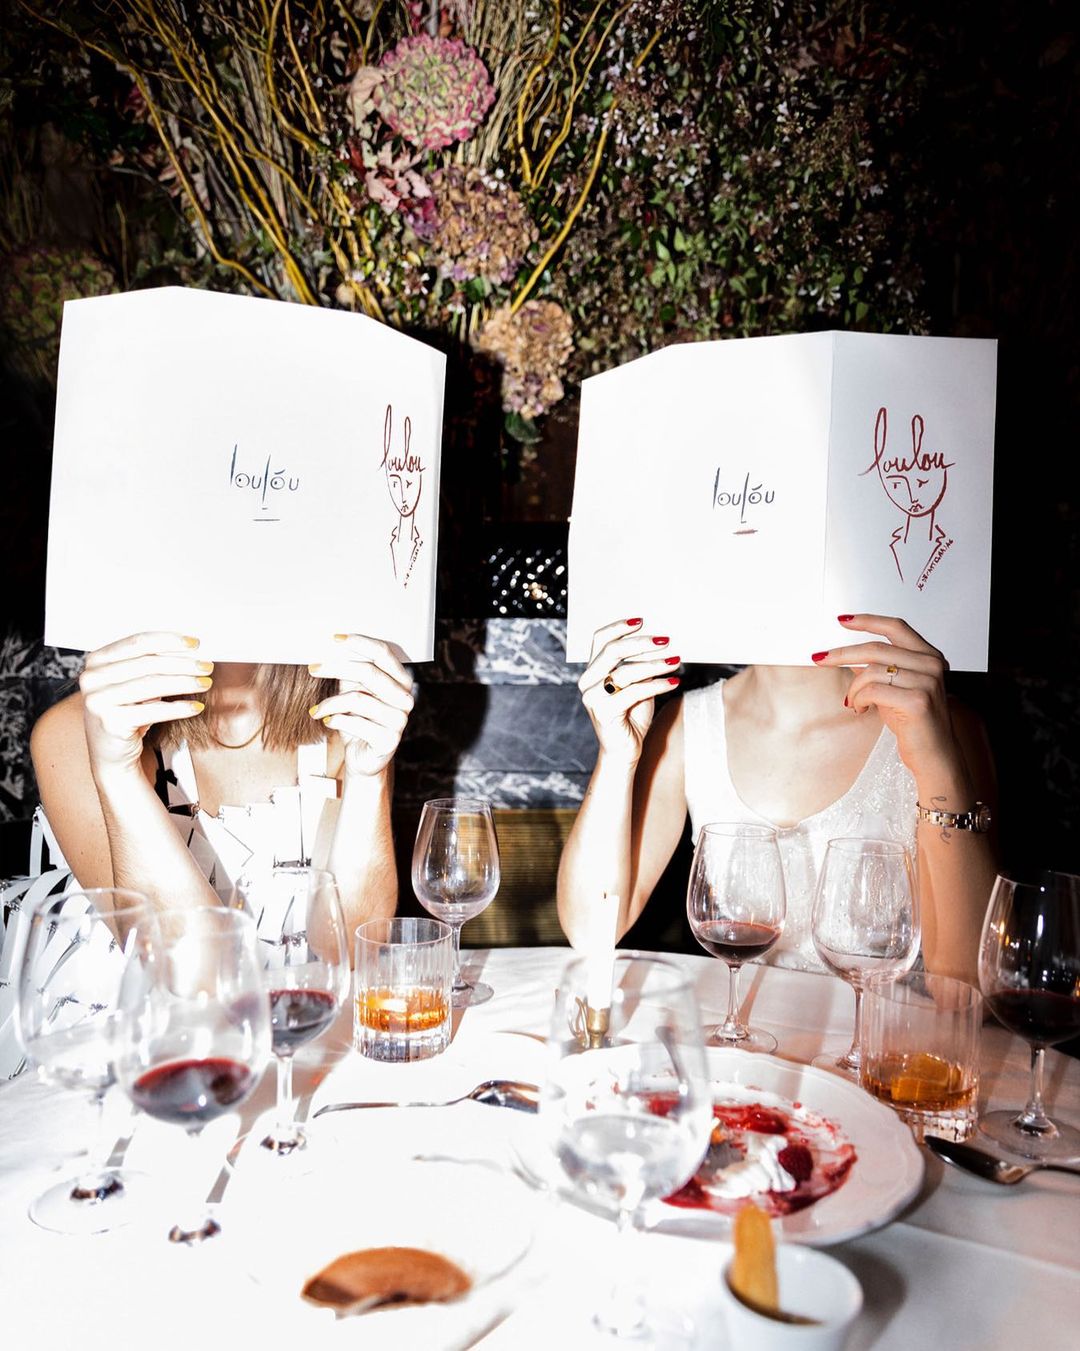 High flash photography at Loulou with two girls holding up the famous menus over their faces